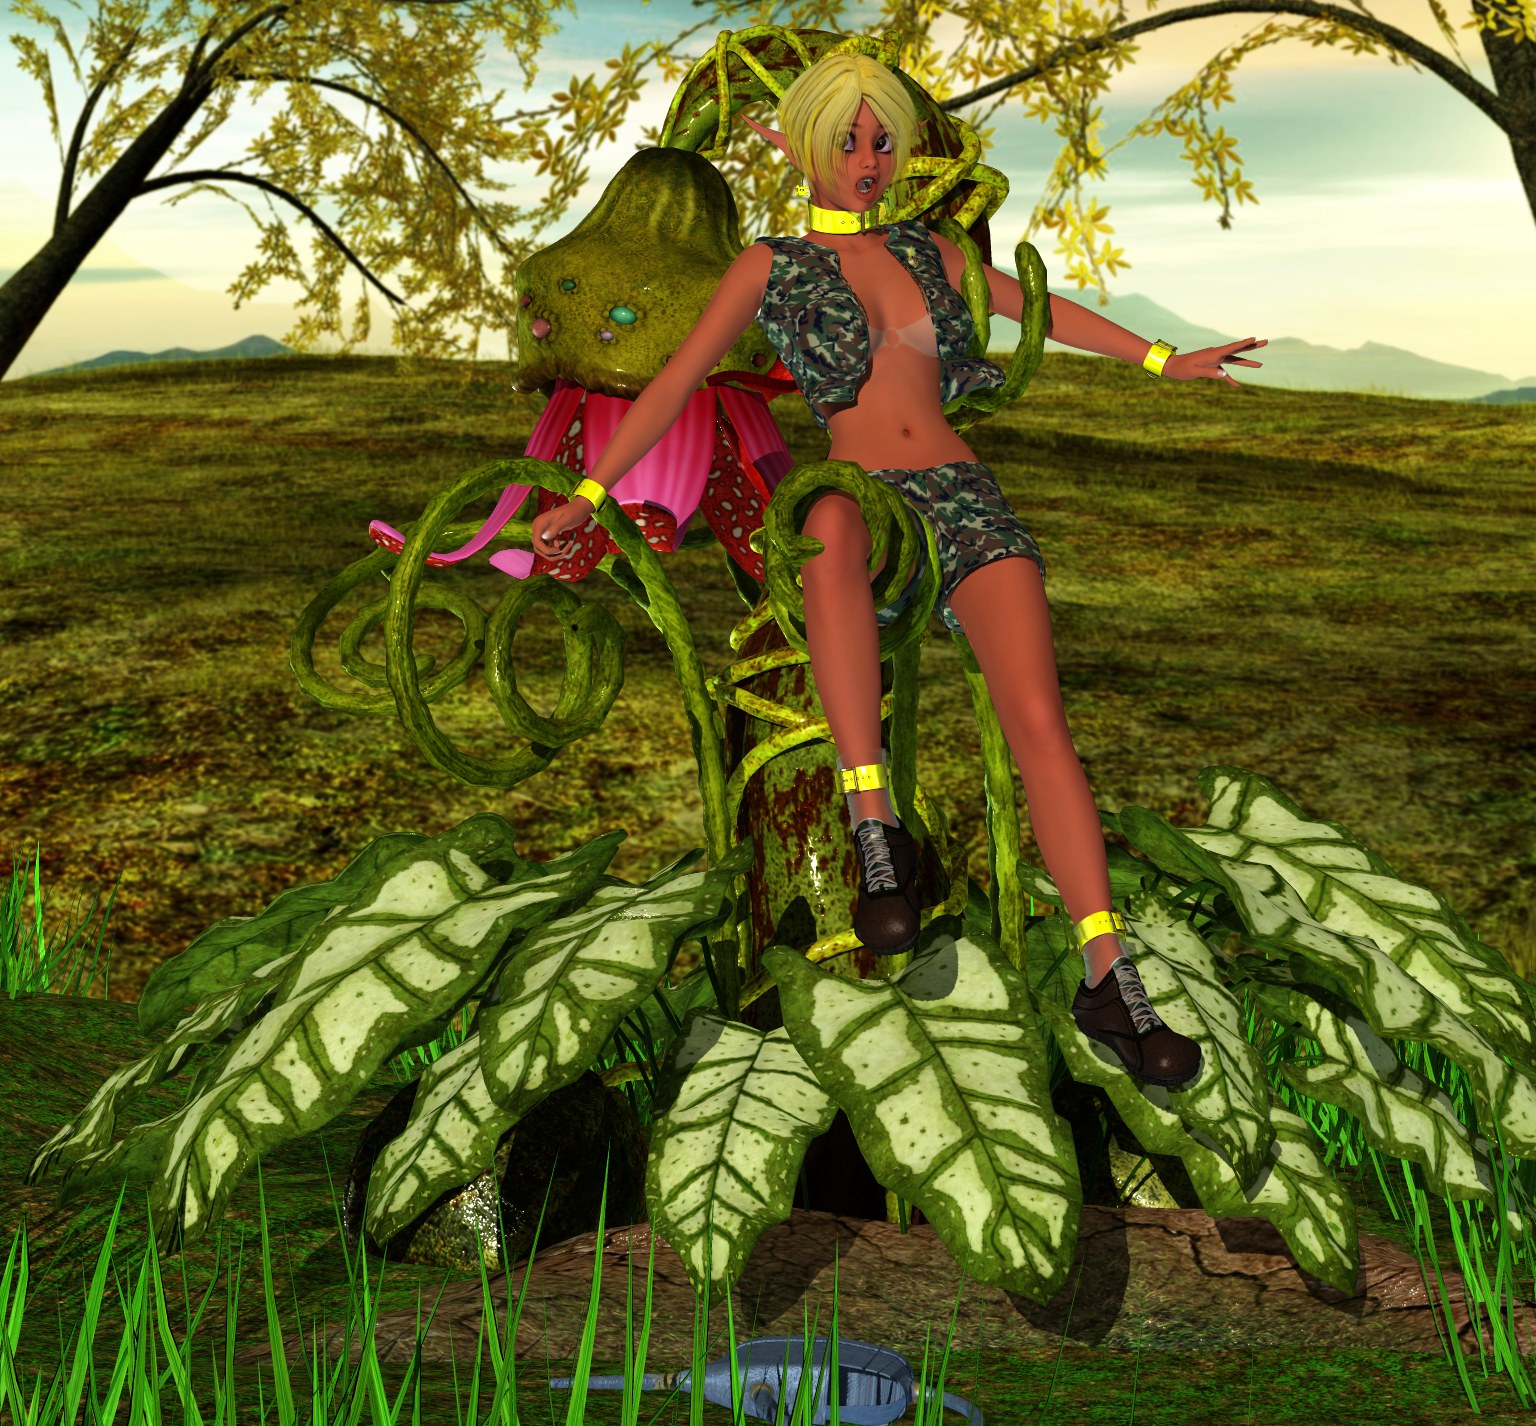 3d Fairy Sex - A pretty 3D fairy screwed hard by an animated plant at 3dEvilMonsters